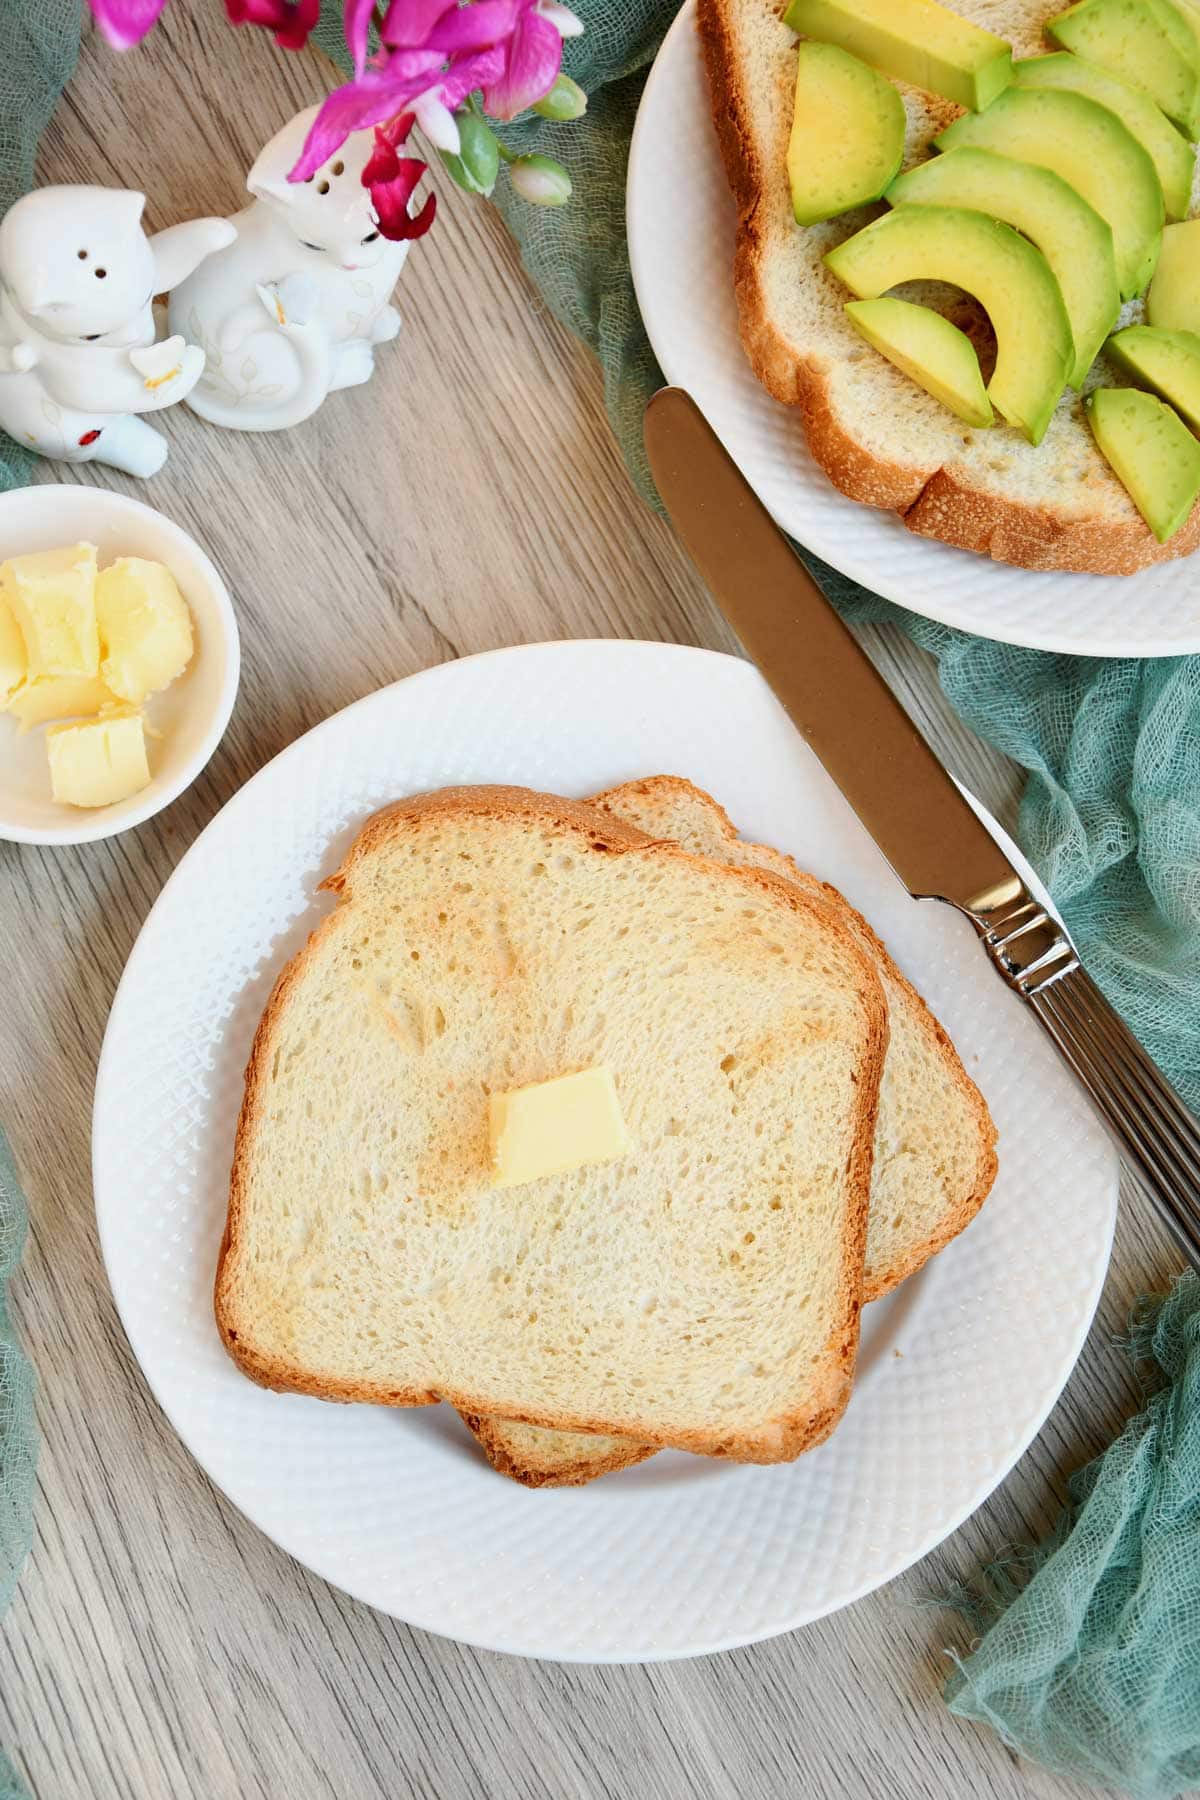 Air fryer toasted bread served on a plate with butter cube.